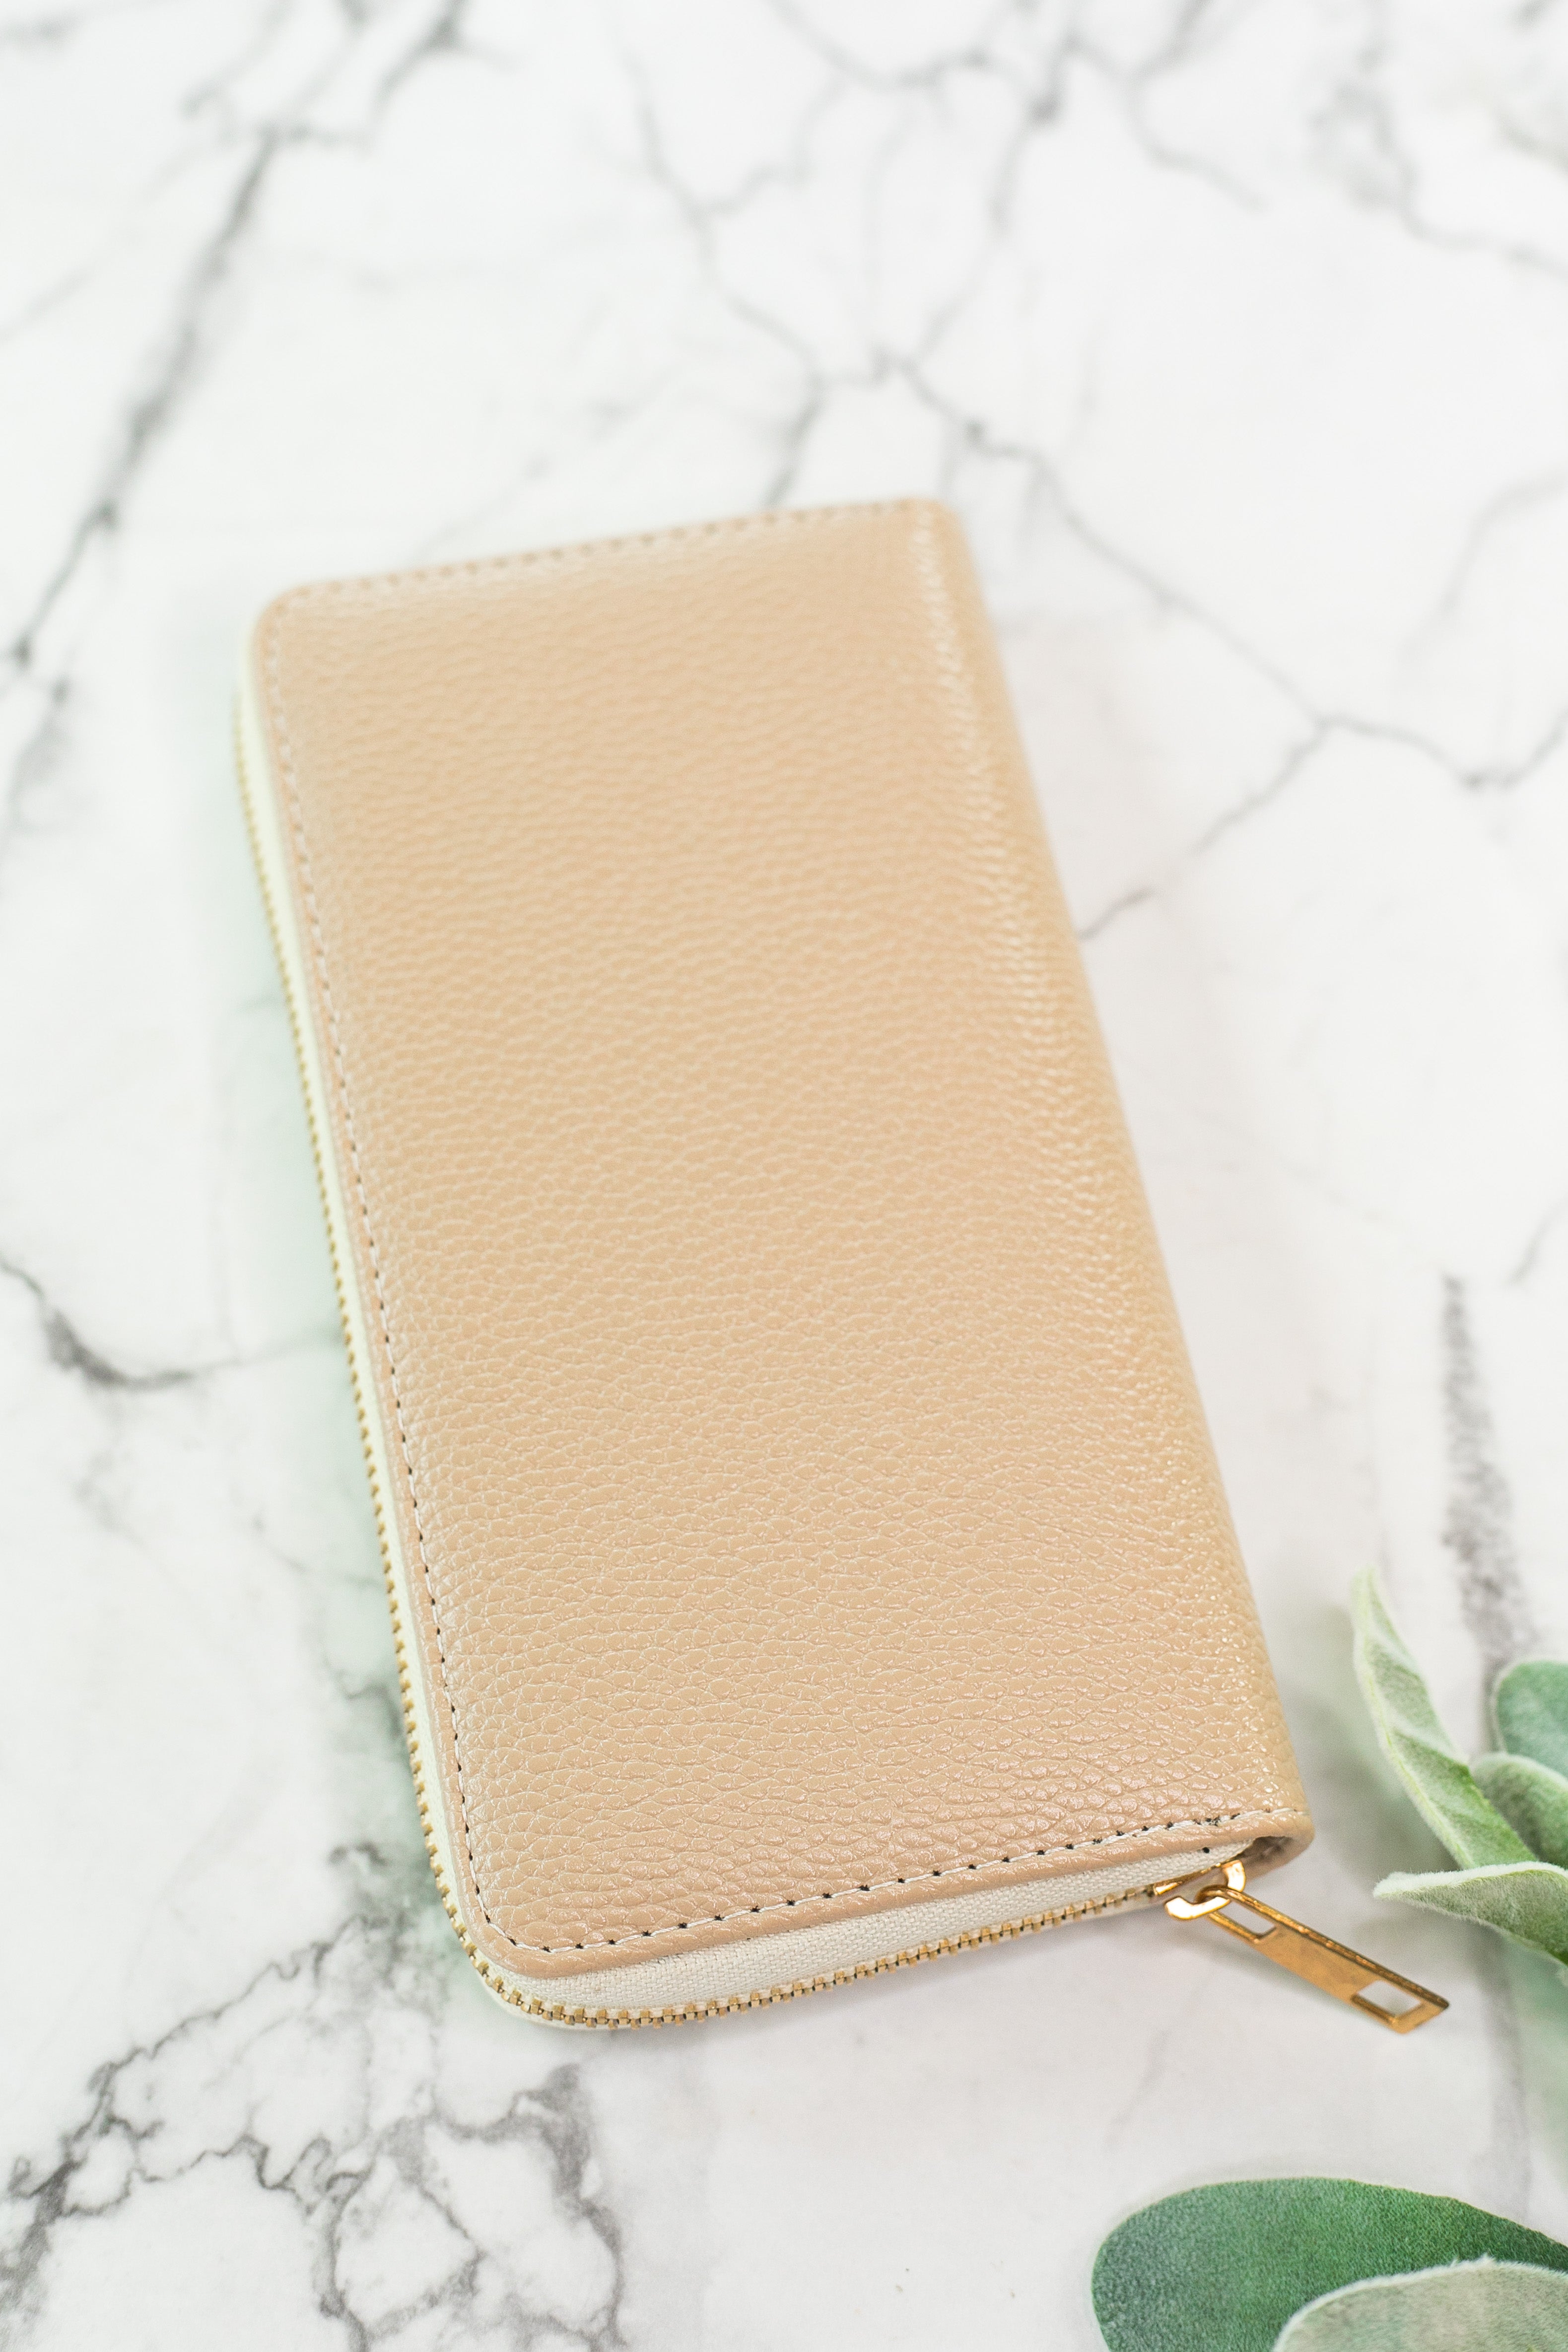 Nude Zip-Around Wallet - Giddy Up Glamour Boutique